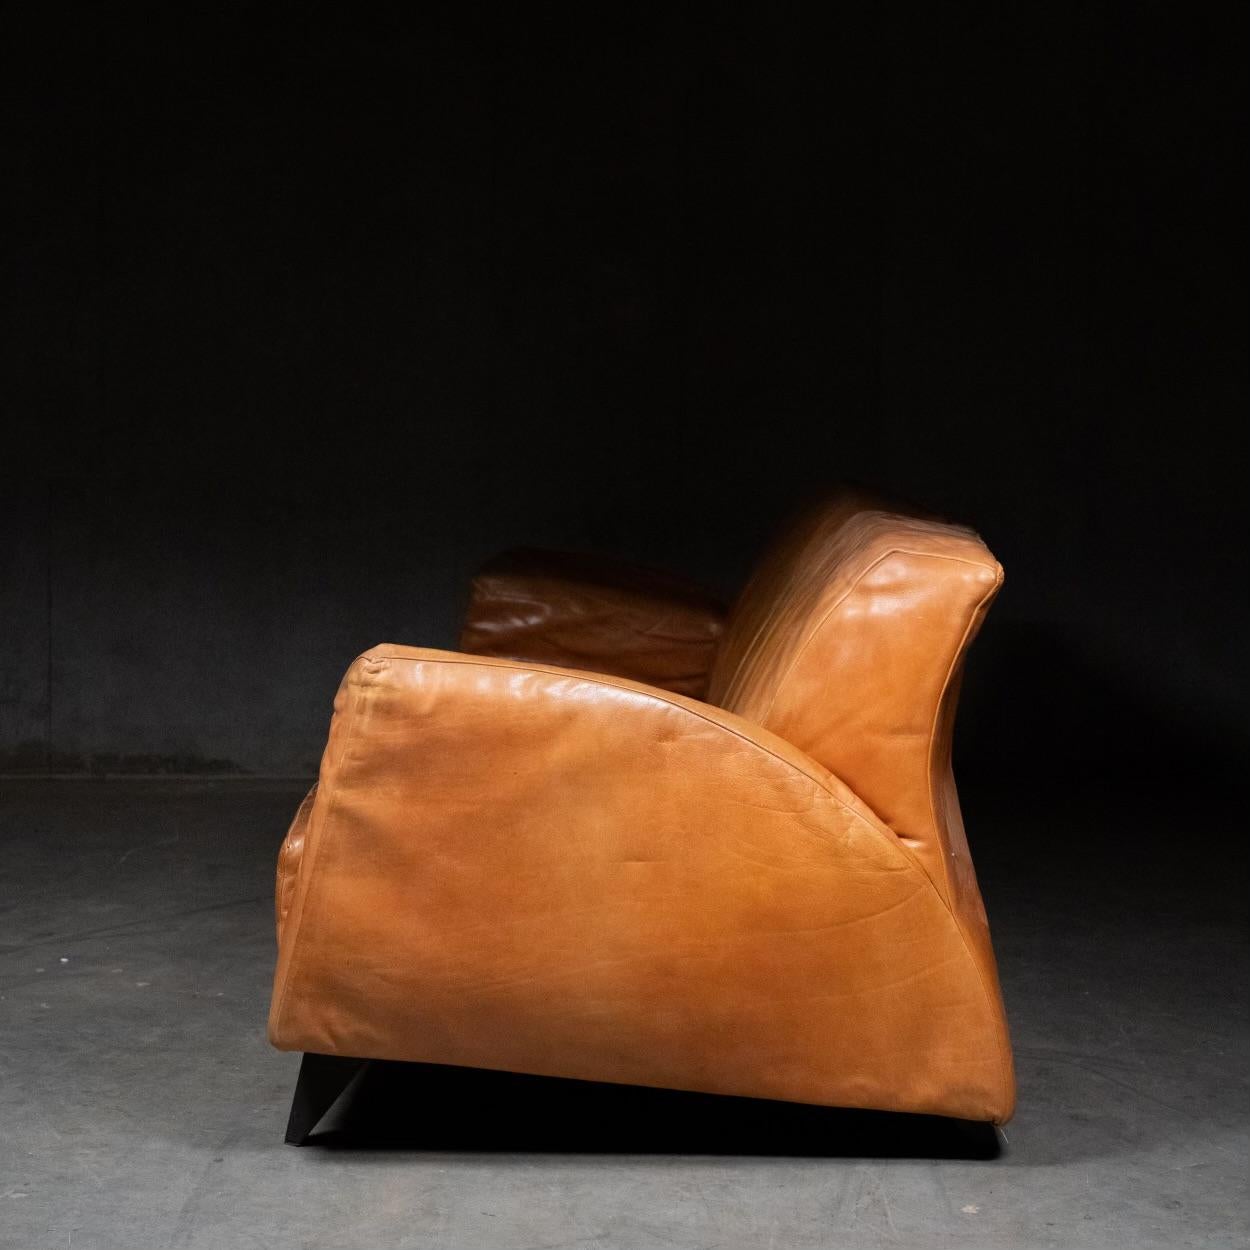 Gerard van den Berg 'Corvette' sofa in cognac leather with tapered metal legs. In original condition with some visible wear and scratching consistent with age and use. 

Acquired from a private collection.